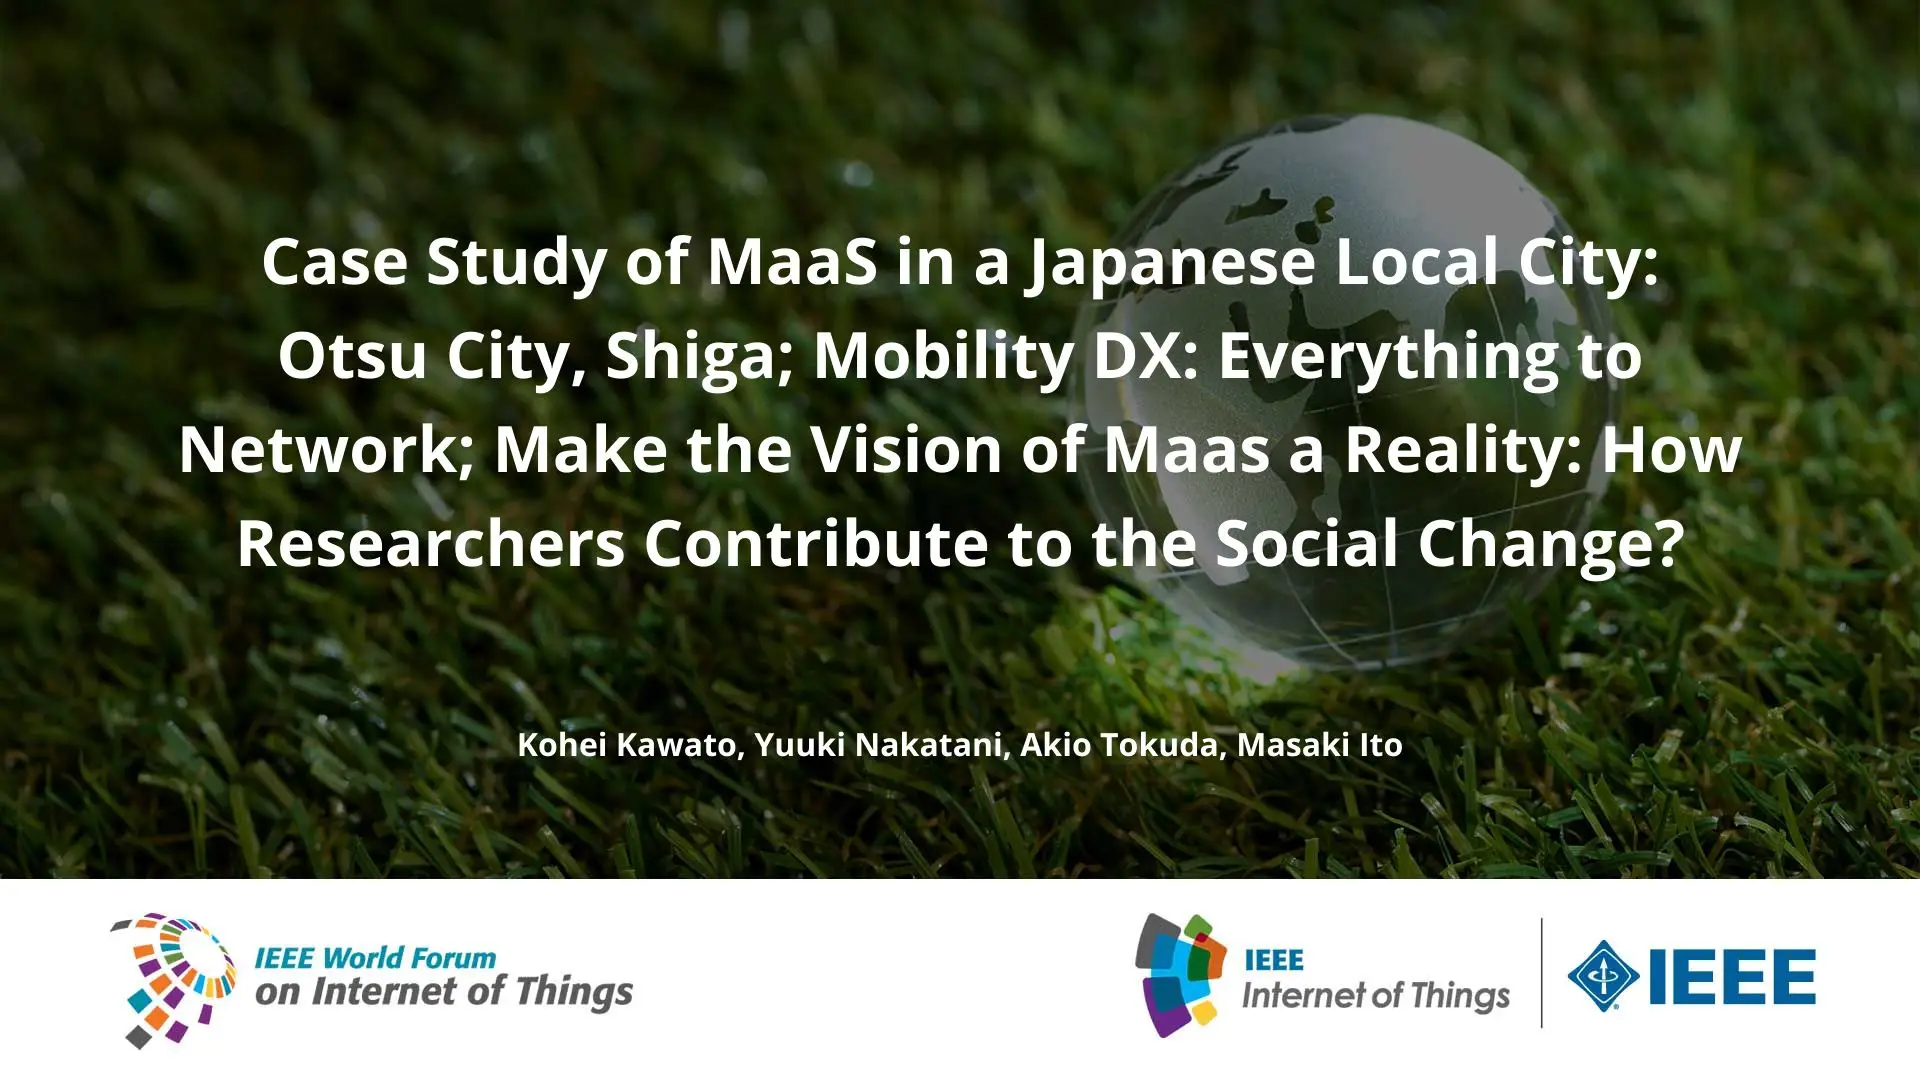 Case Study of MaaS in a Japanese Local City: Otsu City, Shiga; Mobility DX: Everything to Network; Make the Vision of Maas a Reality: How Researchers Contribute to the Social Change?